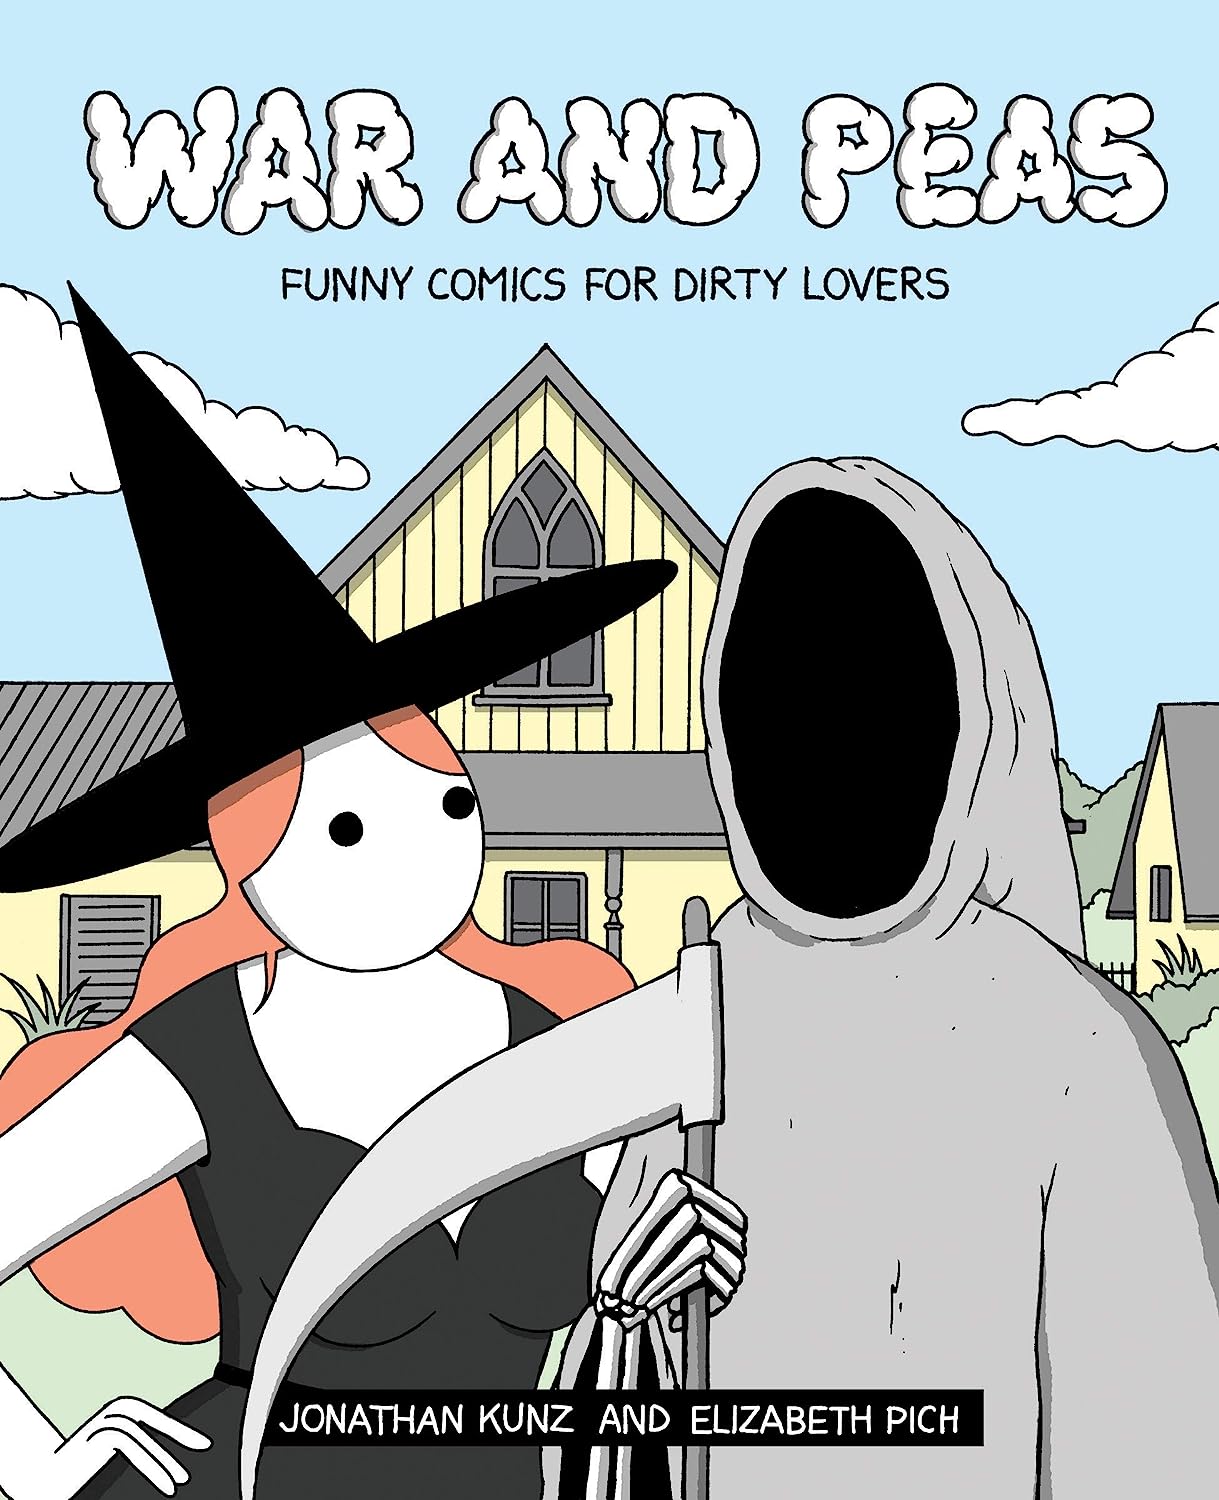 Wars and Peas: Funny Comics for Dirty Lovers - Jonathan Kunz & Elizabeth Pich (Pre-Loved)